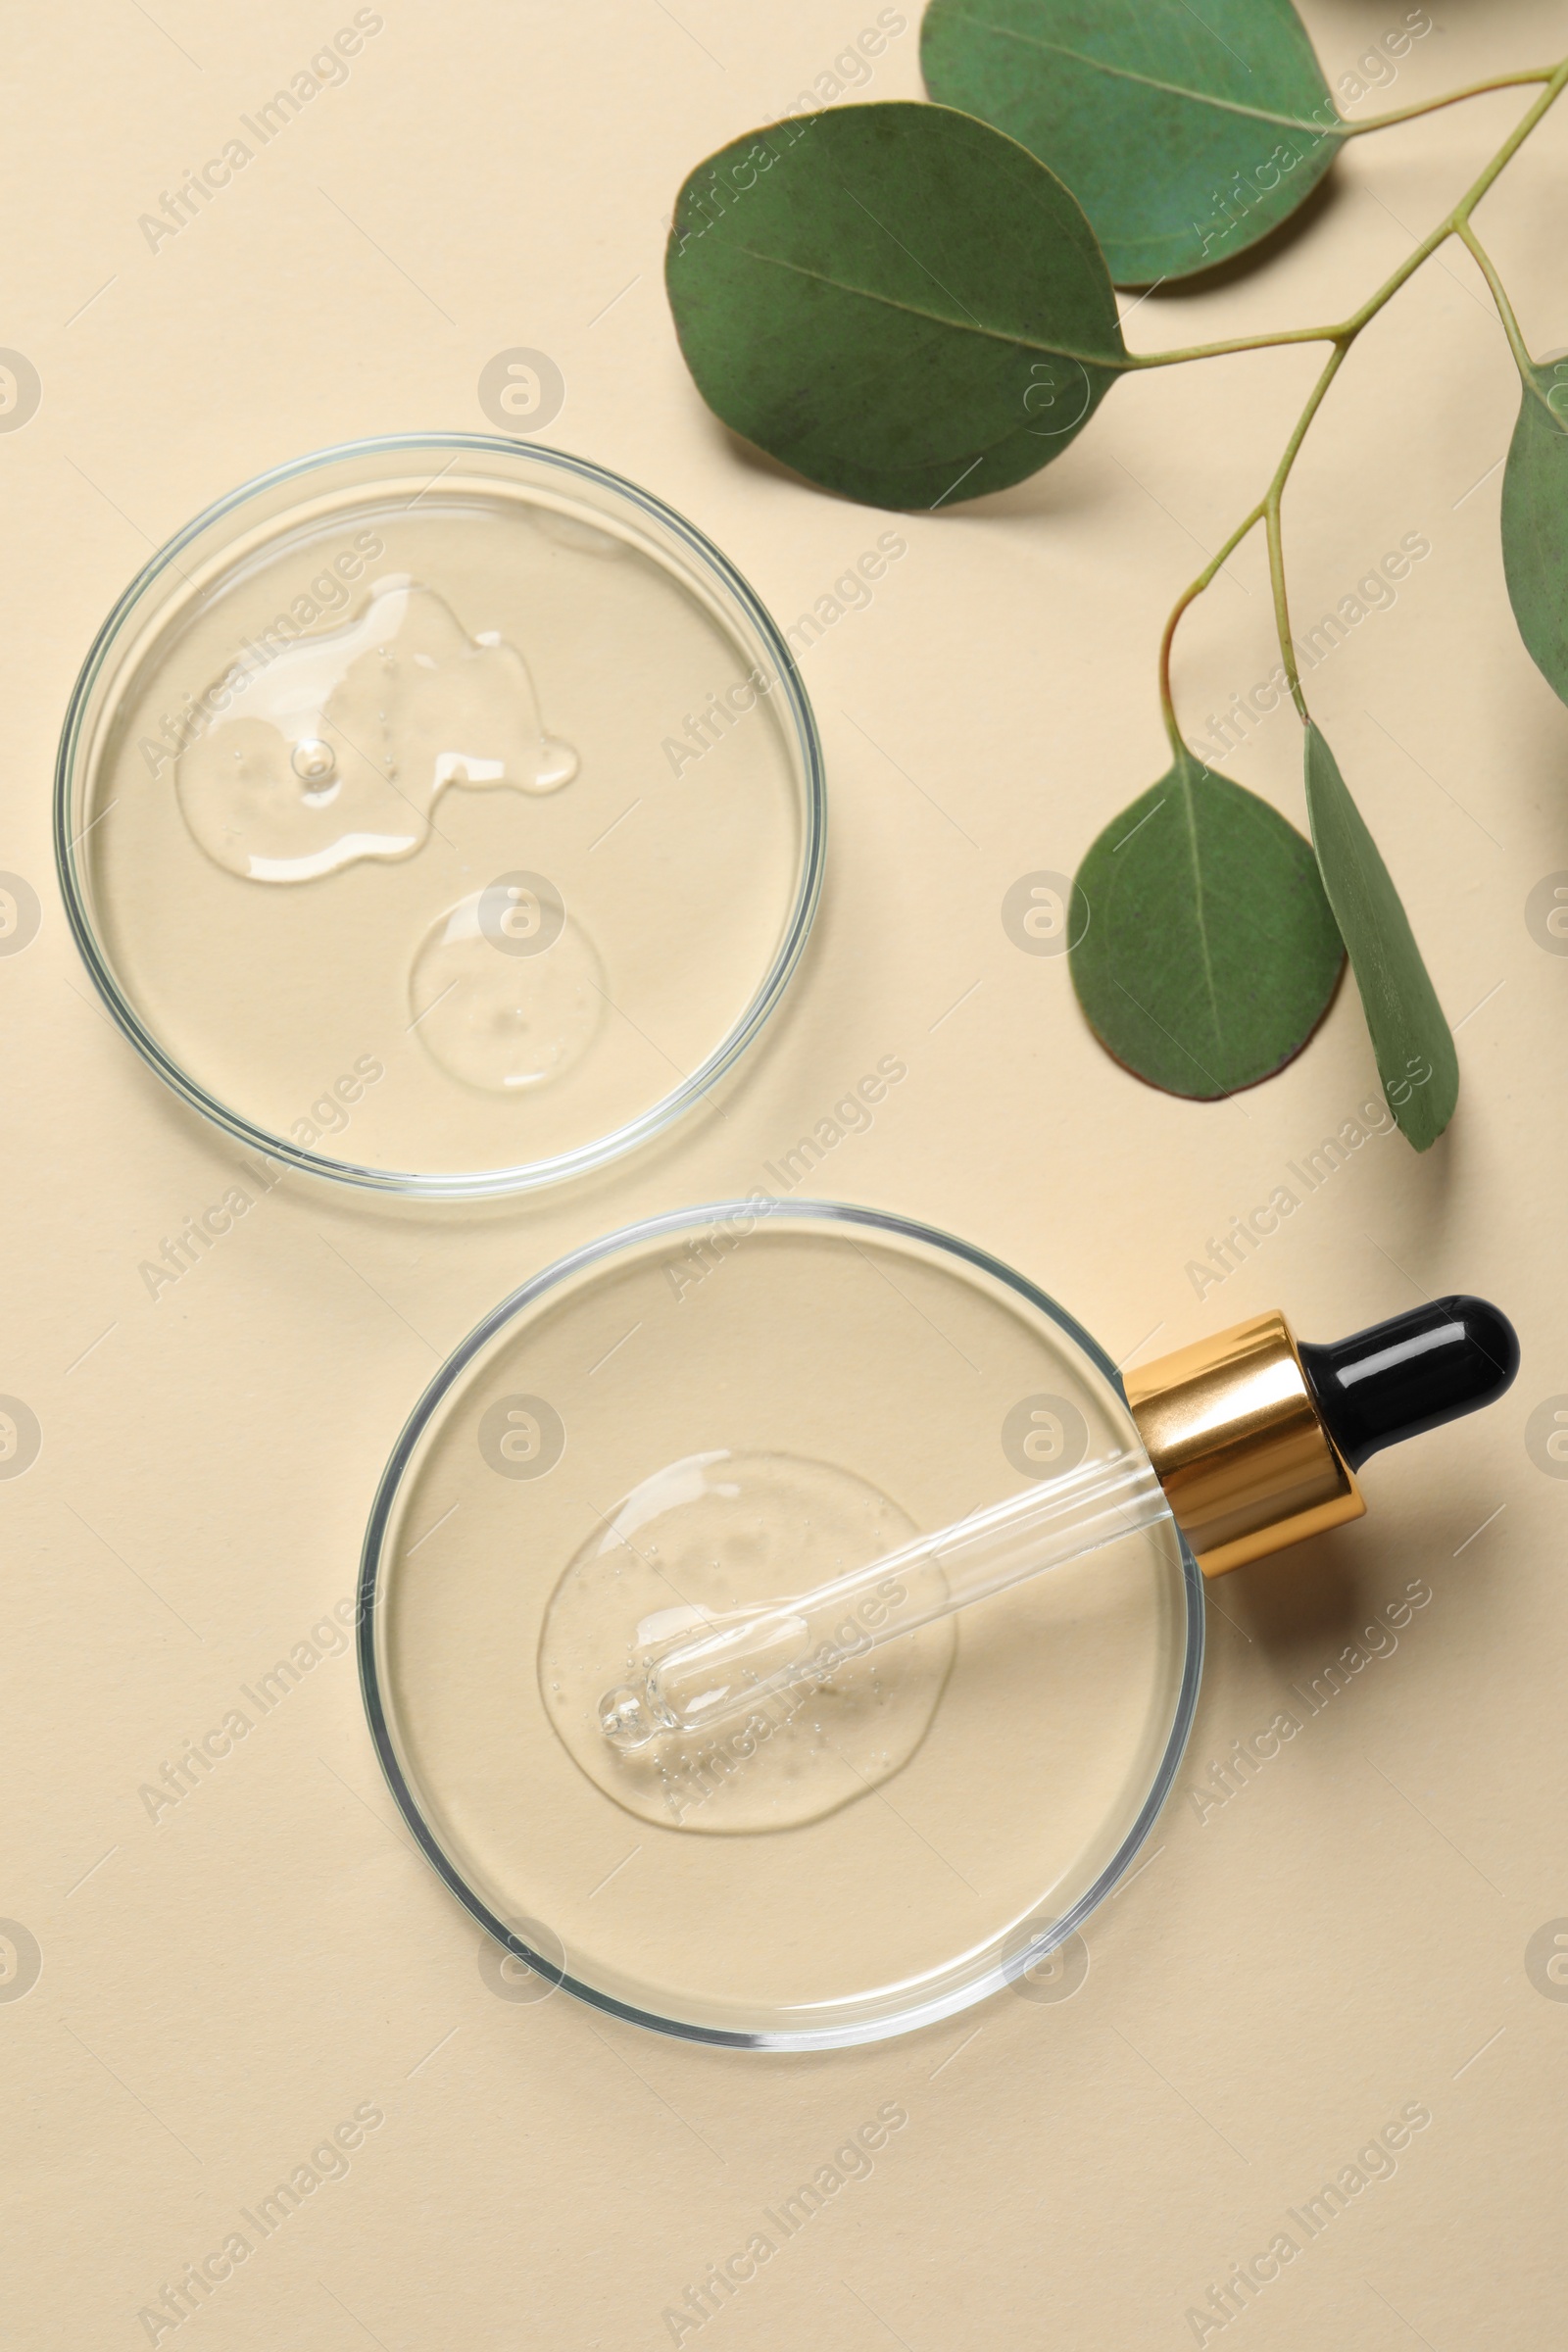 Photo of Petri dishes with samples of cosmetic oil, pipette and eucalyptus leaves on beige background, flat lay